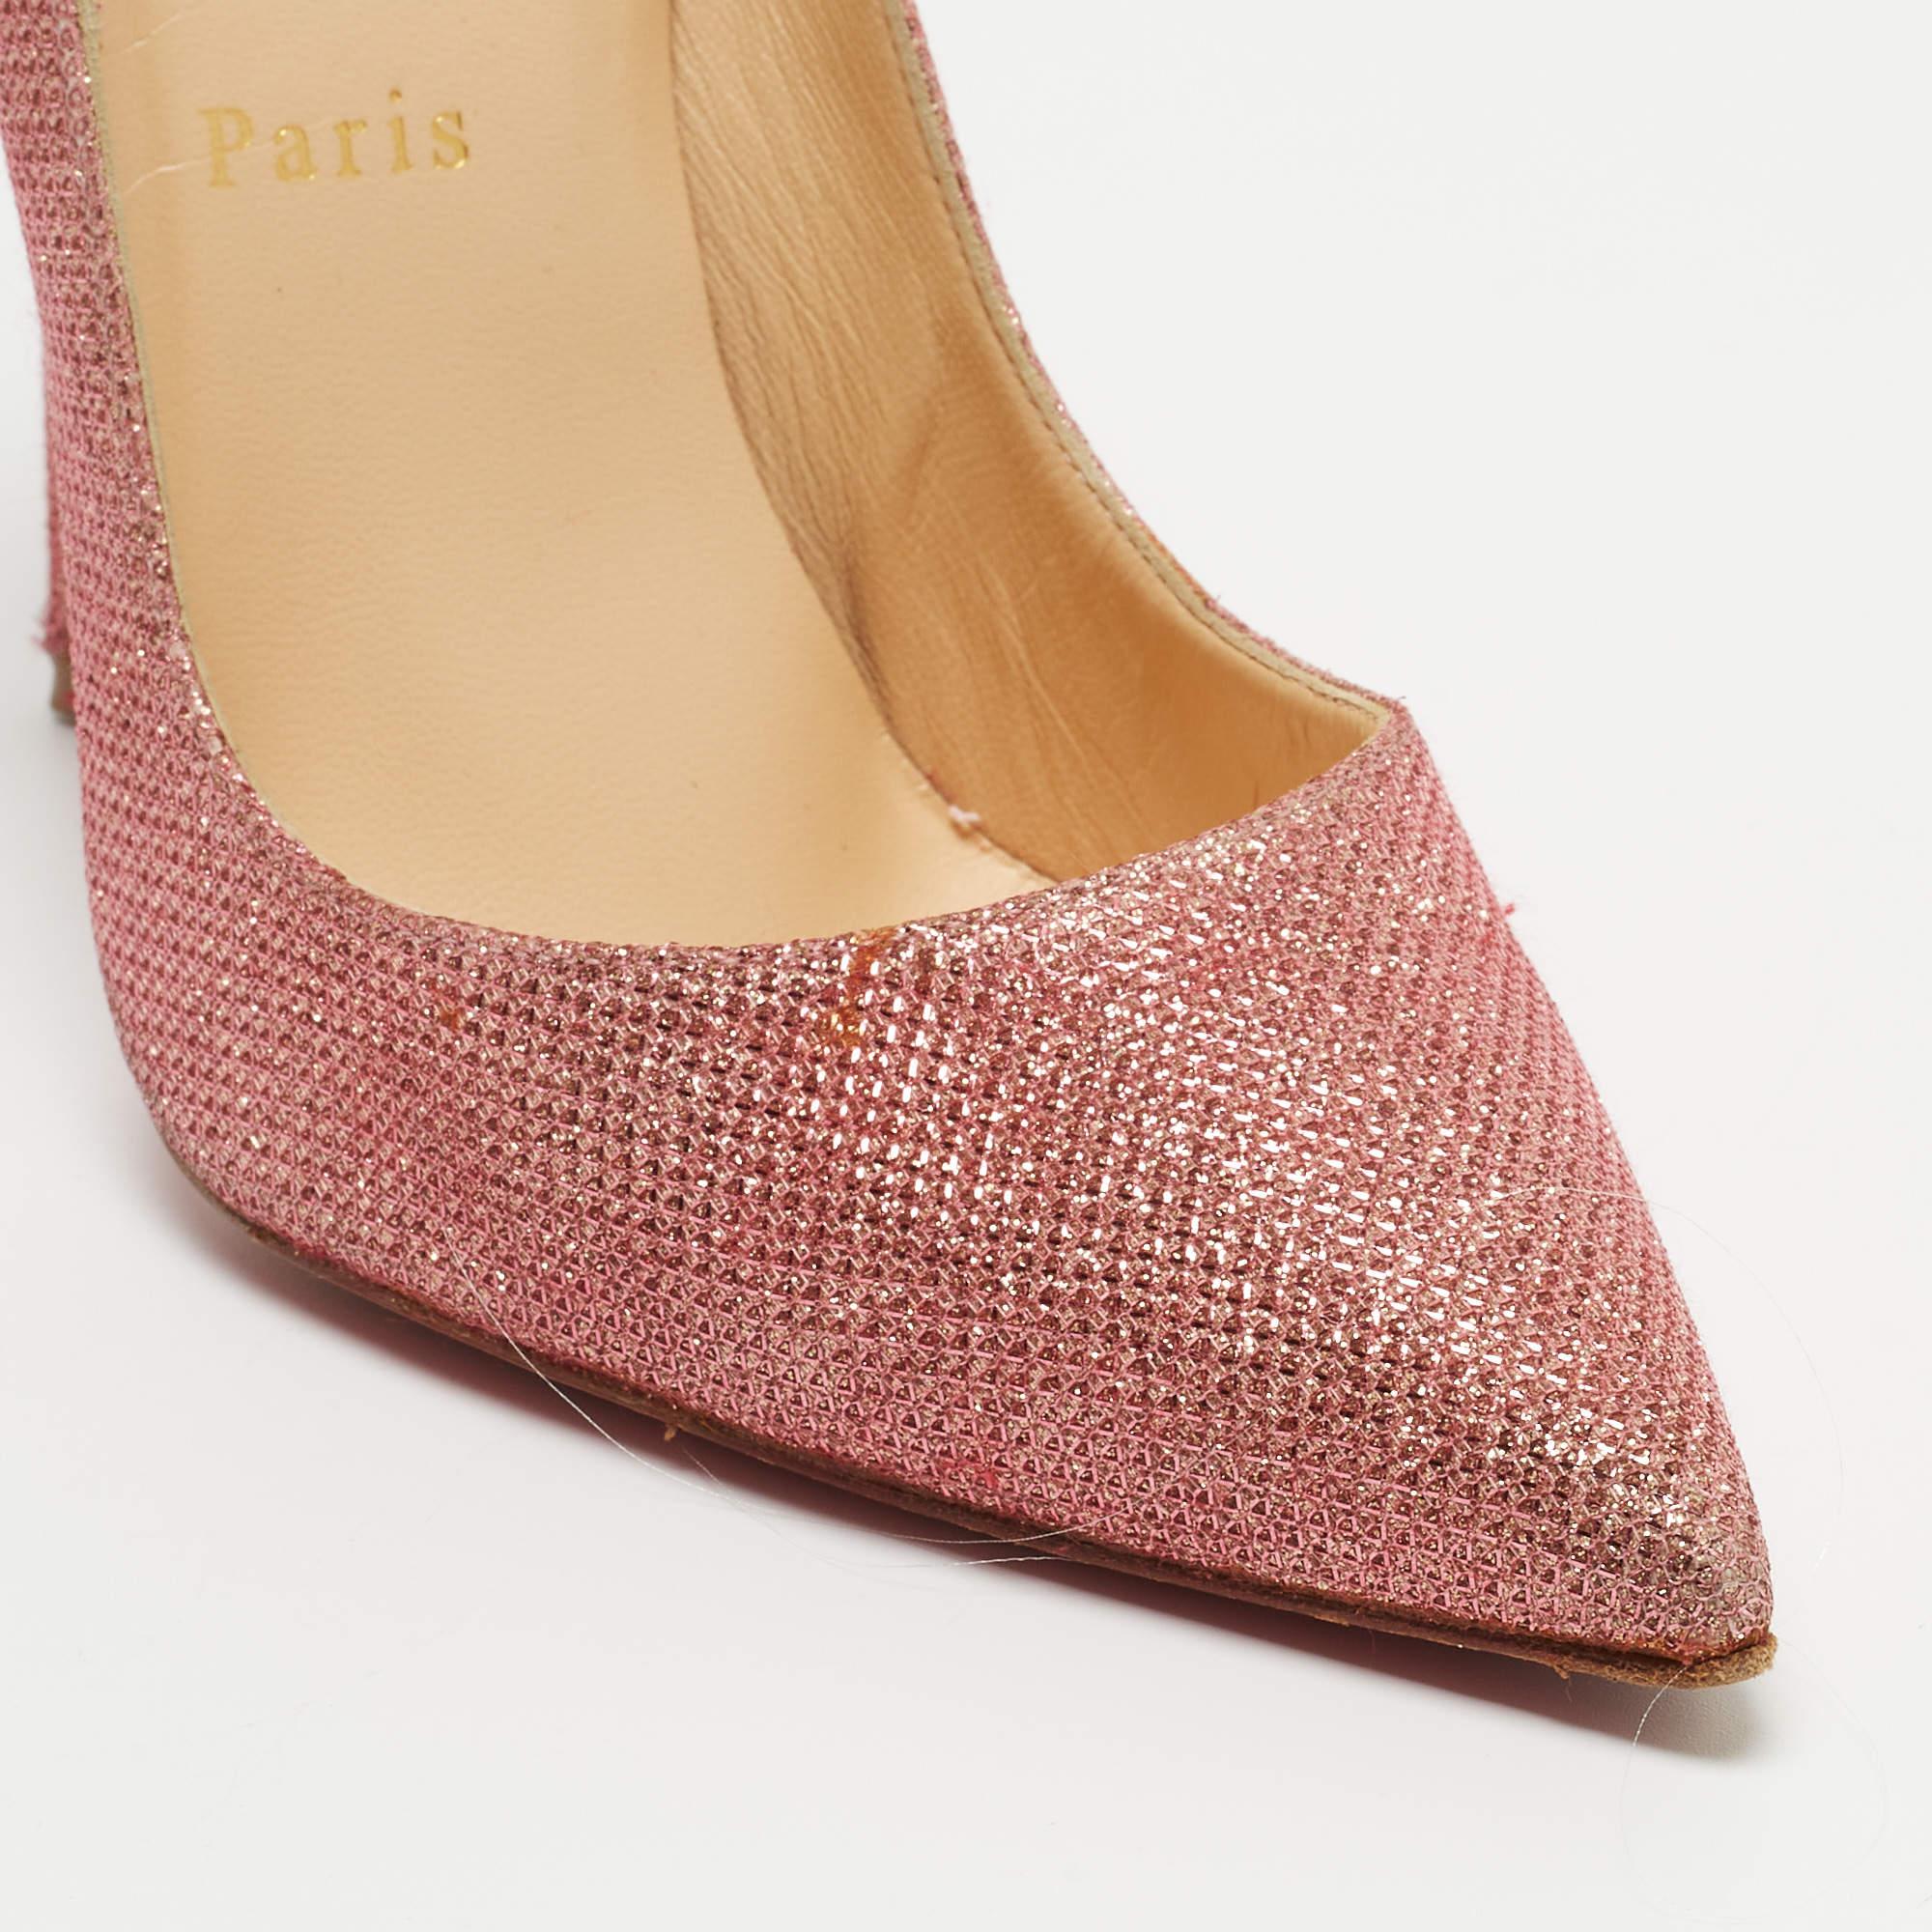 Christian Louboutin Pink Glitter So Kate Pumps Size 38 For Sale 5